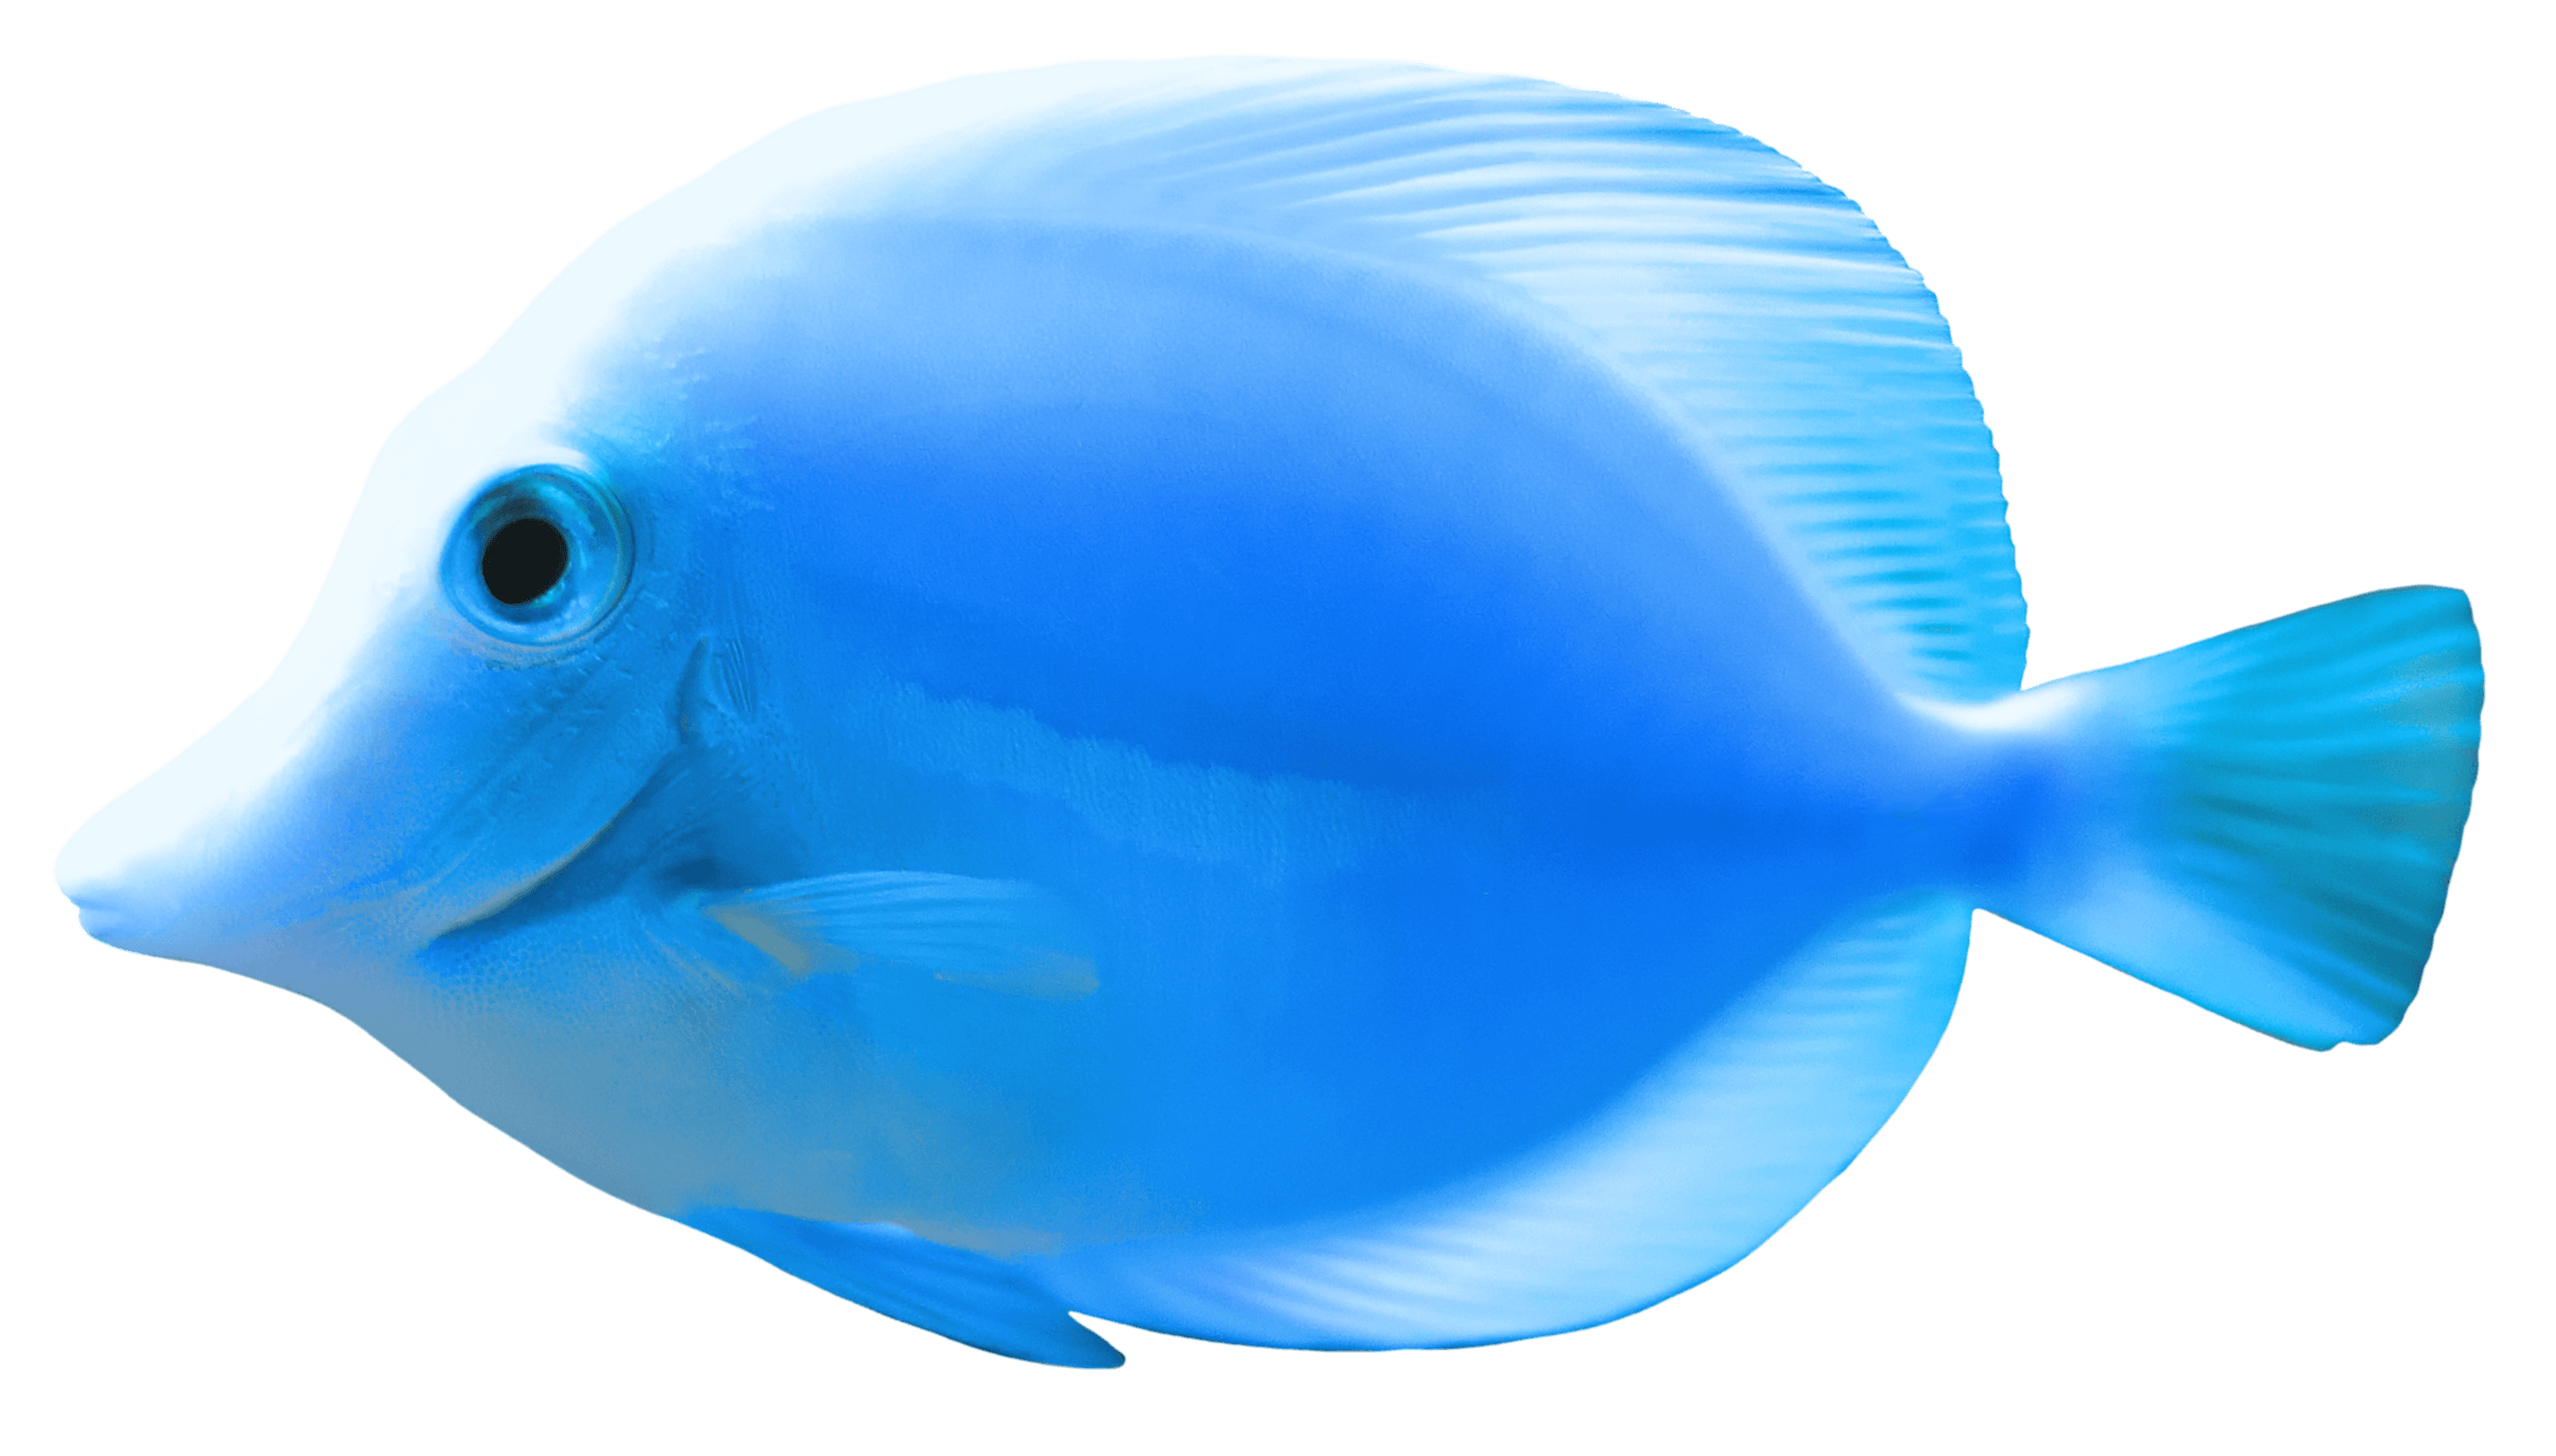 Blue and White Fish Wallpaper 2868x1634